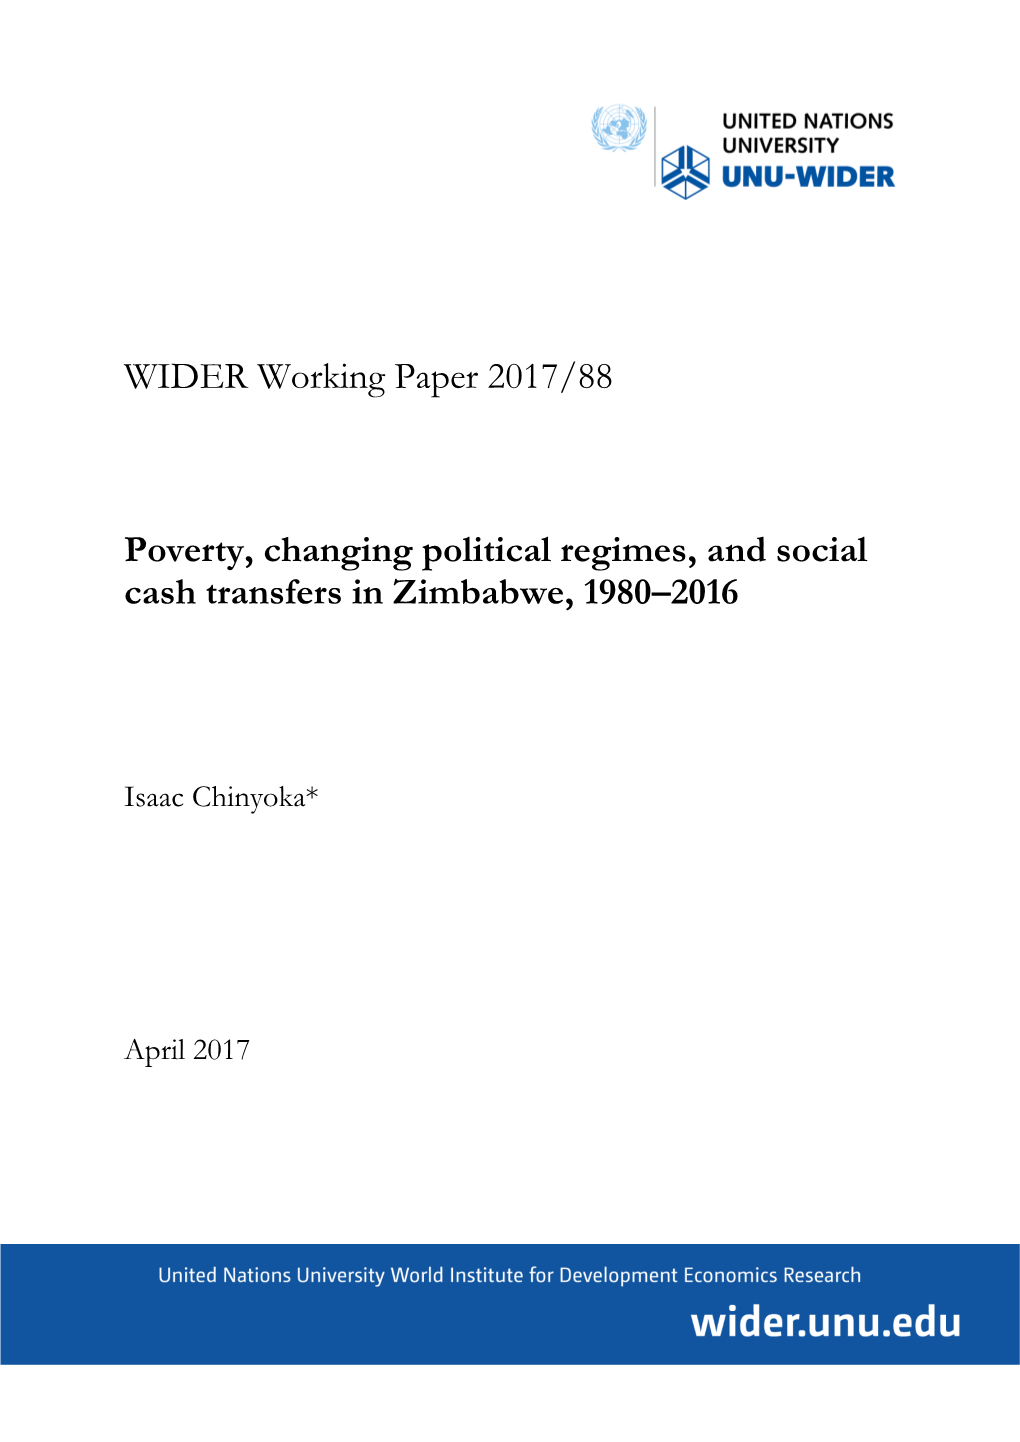 Poverty, Changing Political Regimes, and Social Cash Transfers in Zimbabwe, 1980–2016